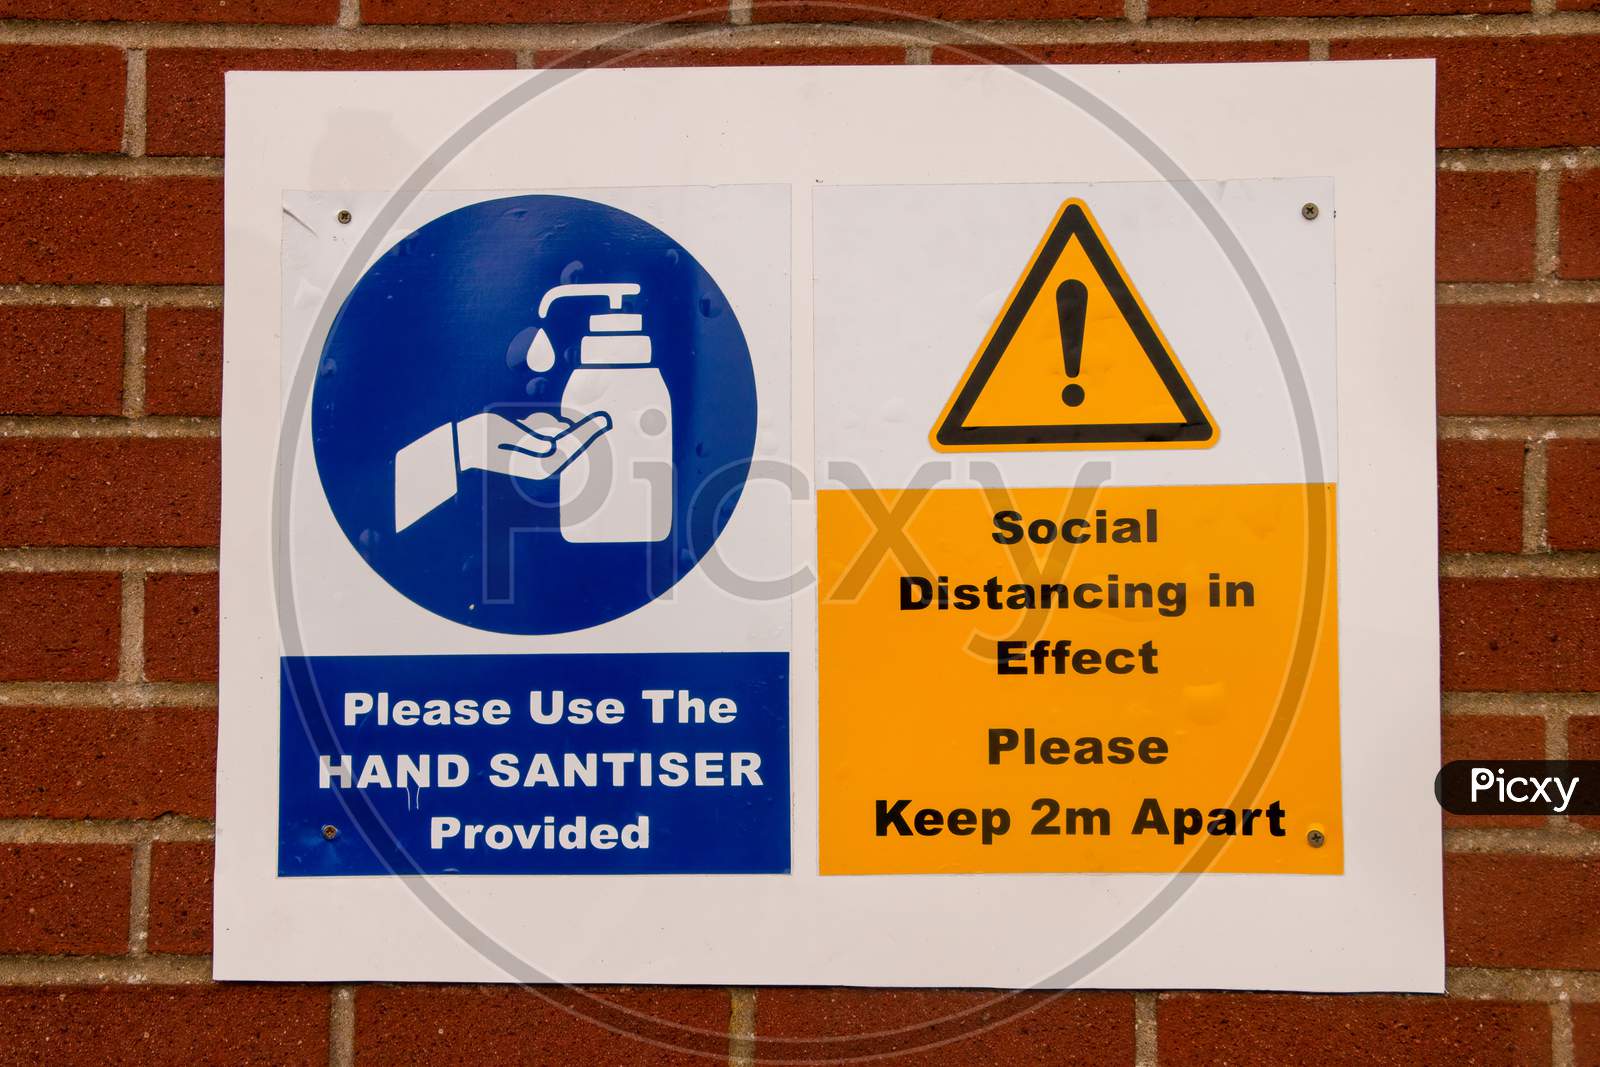 New Normal Warning Signs. Social Distancing Keep 2M Apart In Yellow And Use Hand Santiser Provided In Blue. Norfolk, UK - October 4th 2020